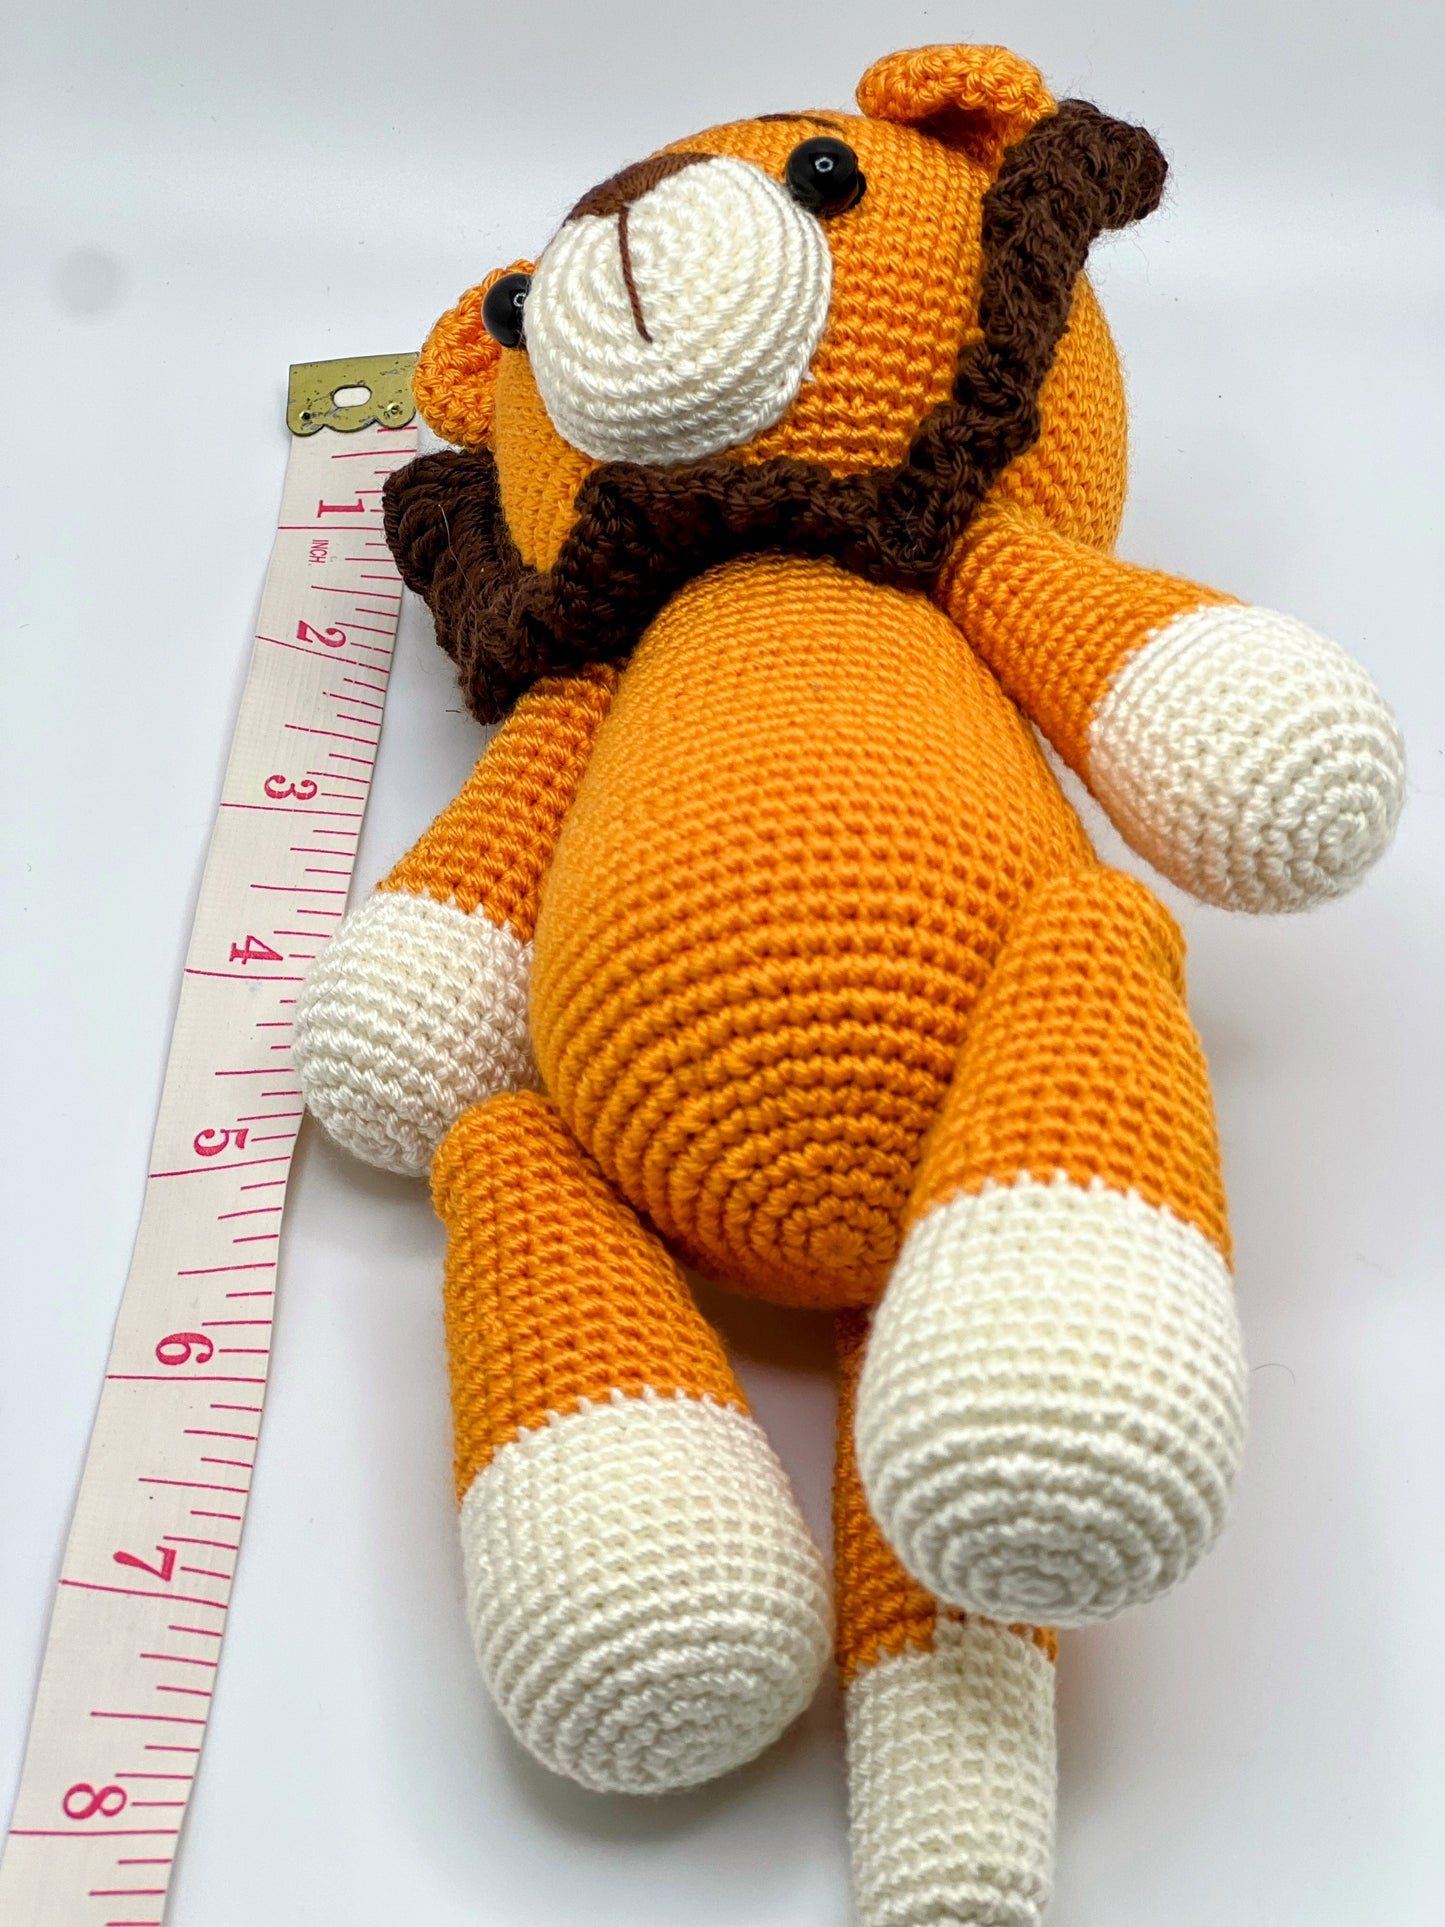 Stuffed Lion Toy With Moving Legs - Crochet Knitted Amigurumi Toy